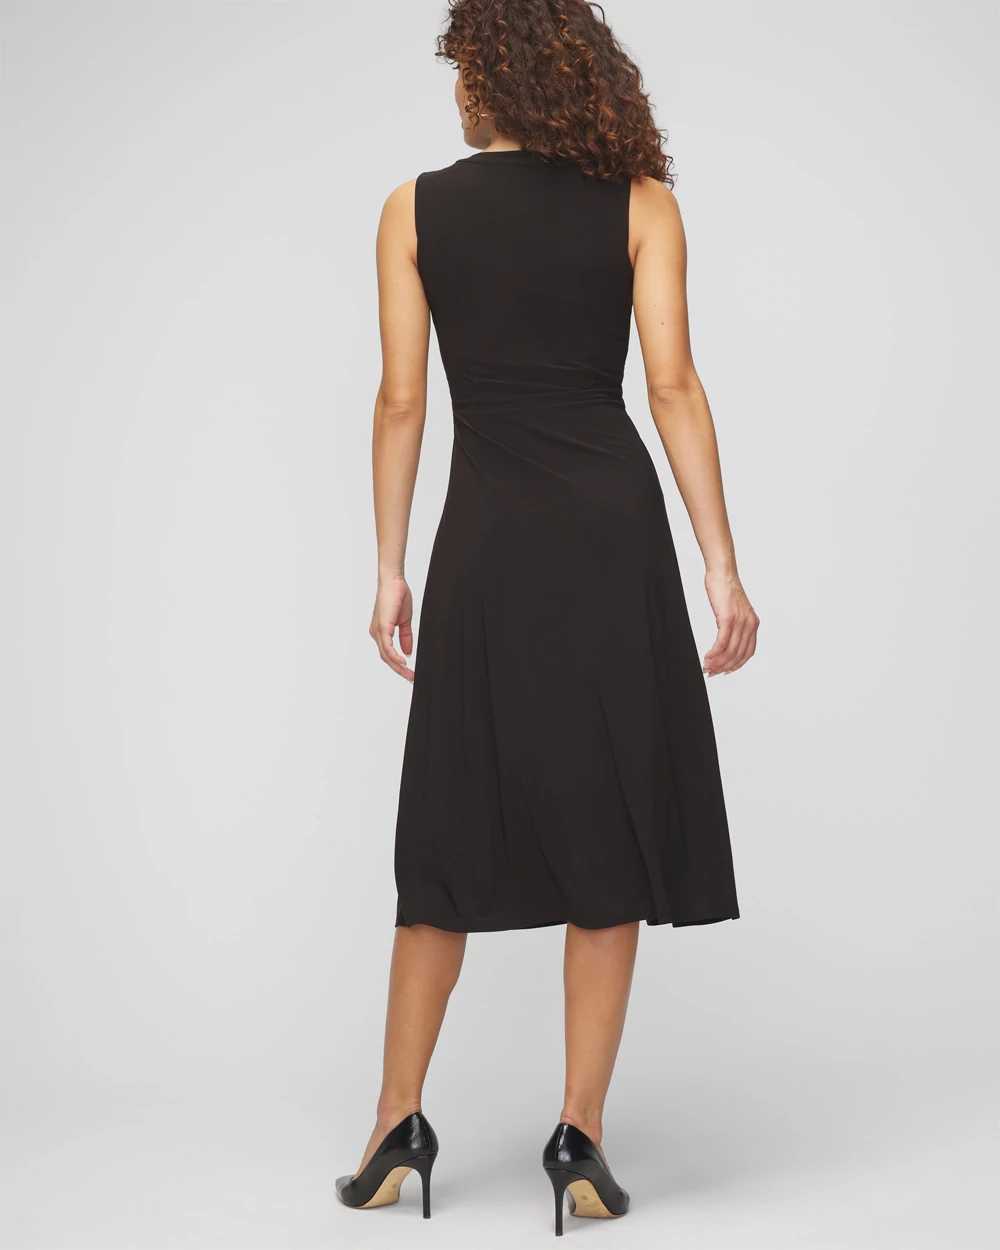 Sleeveless Matte Jersey Crest Button Midi Dress click to view larger image.